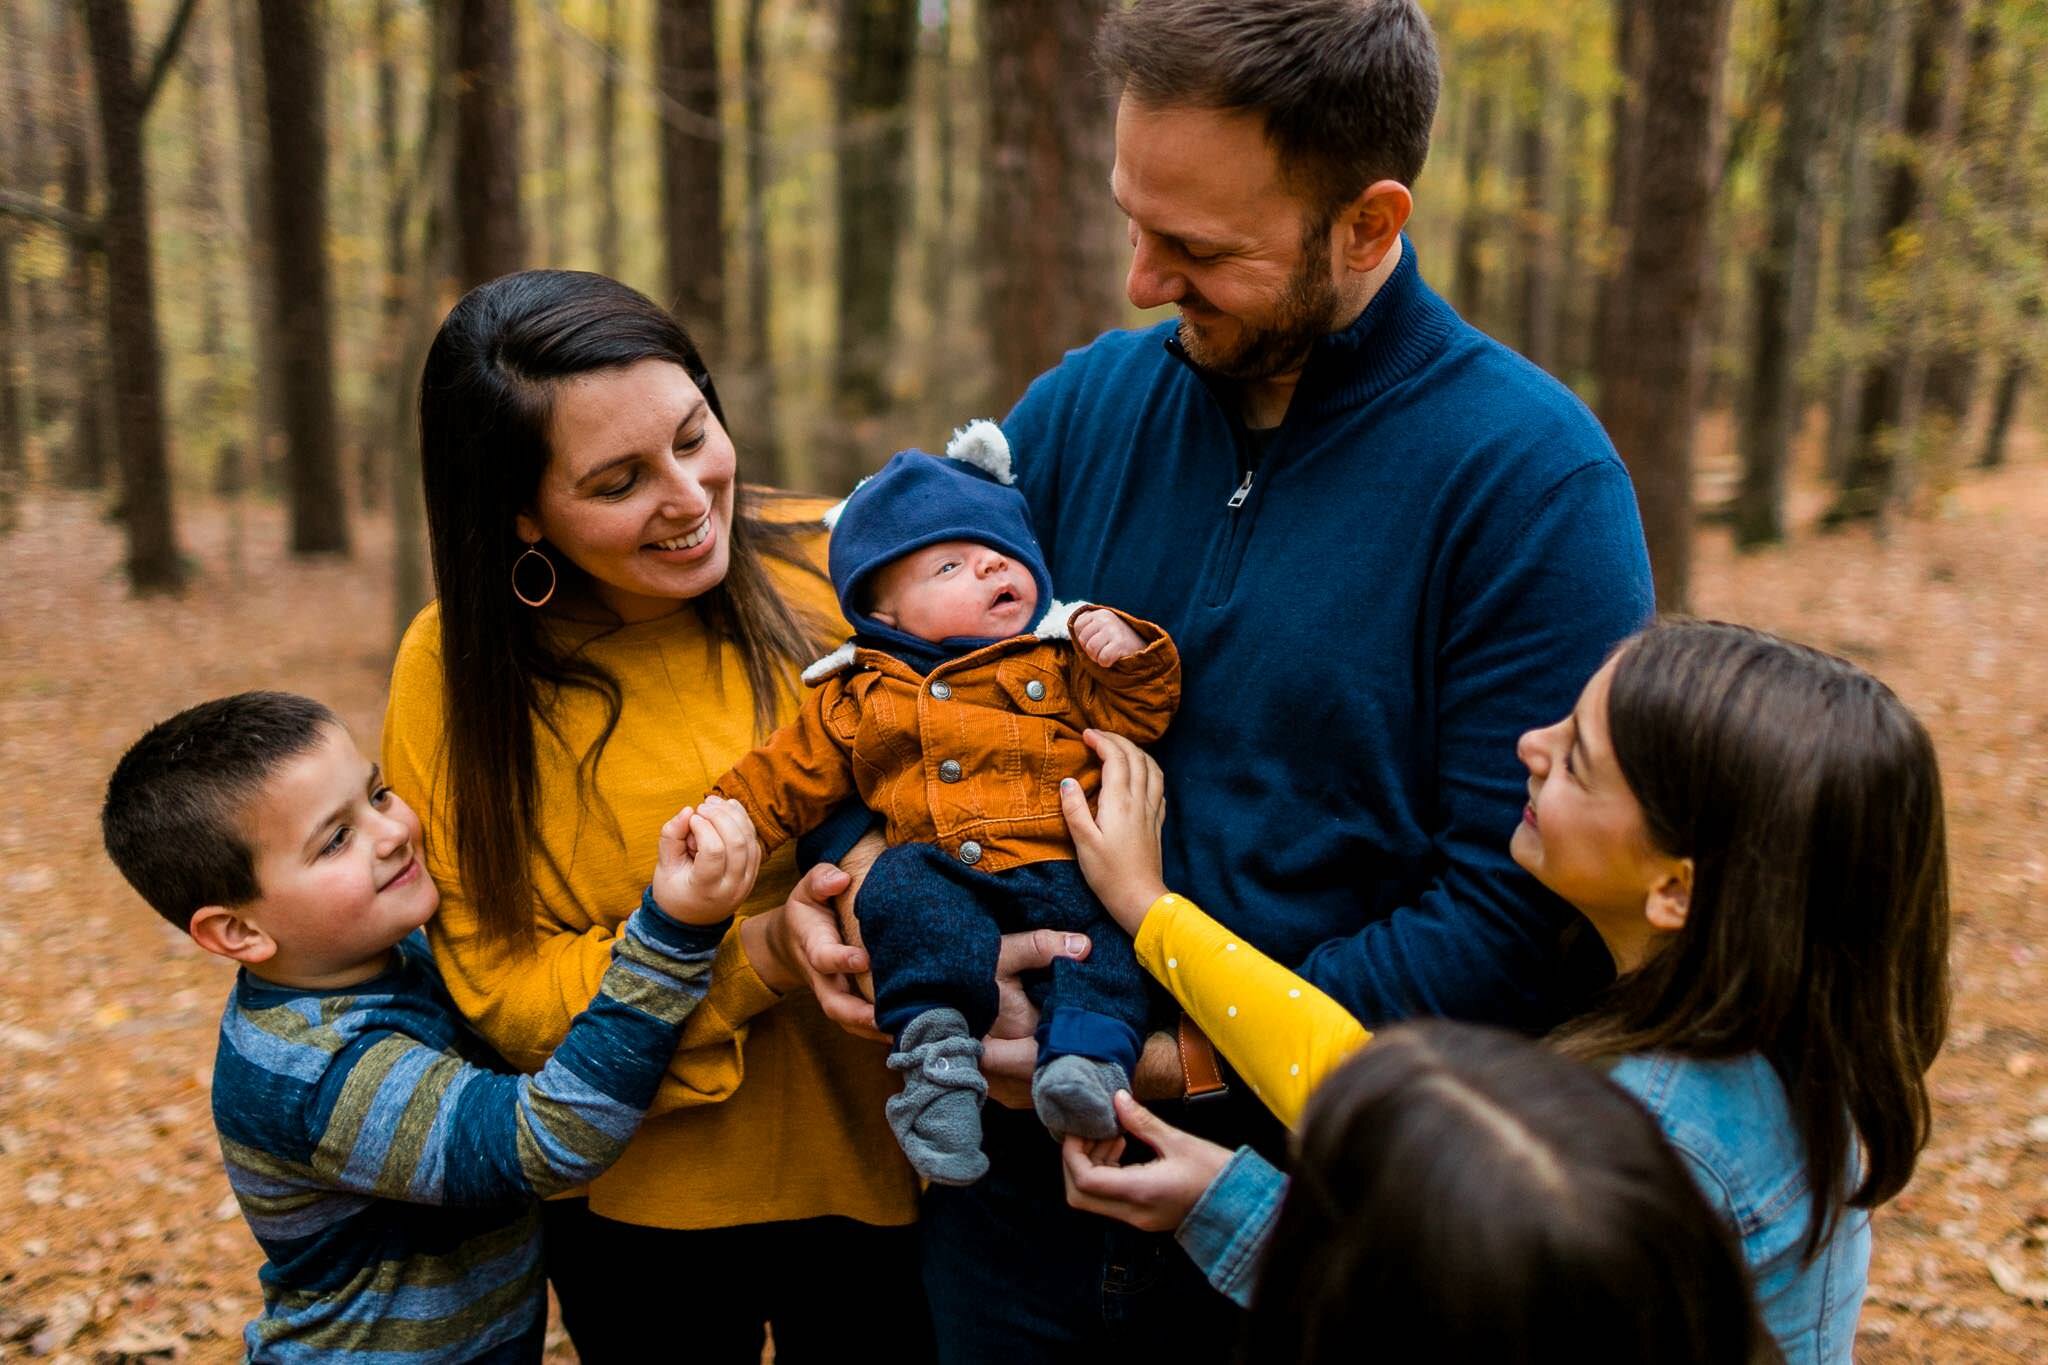 Candid family photo at Umstead Park | Raleigh Family Photographer | By G. Lin Photography